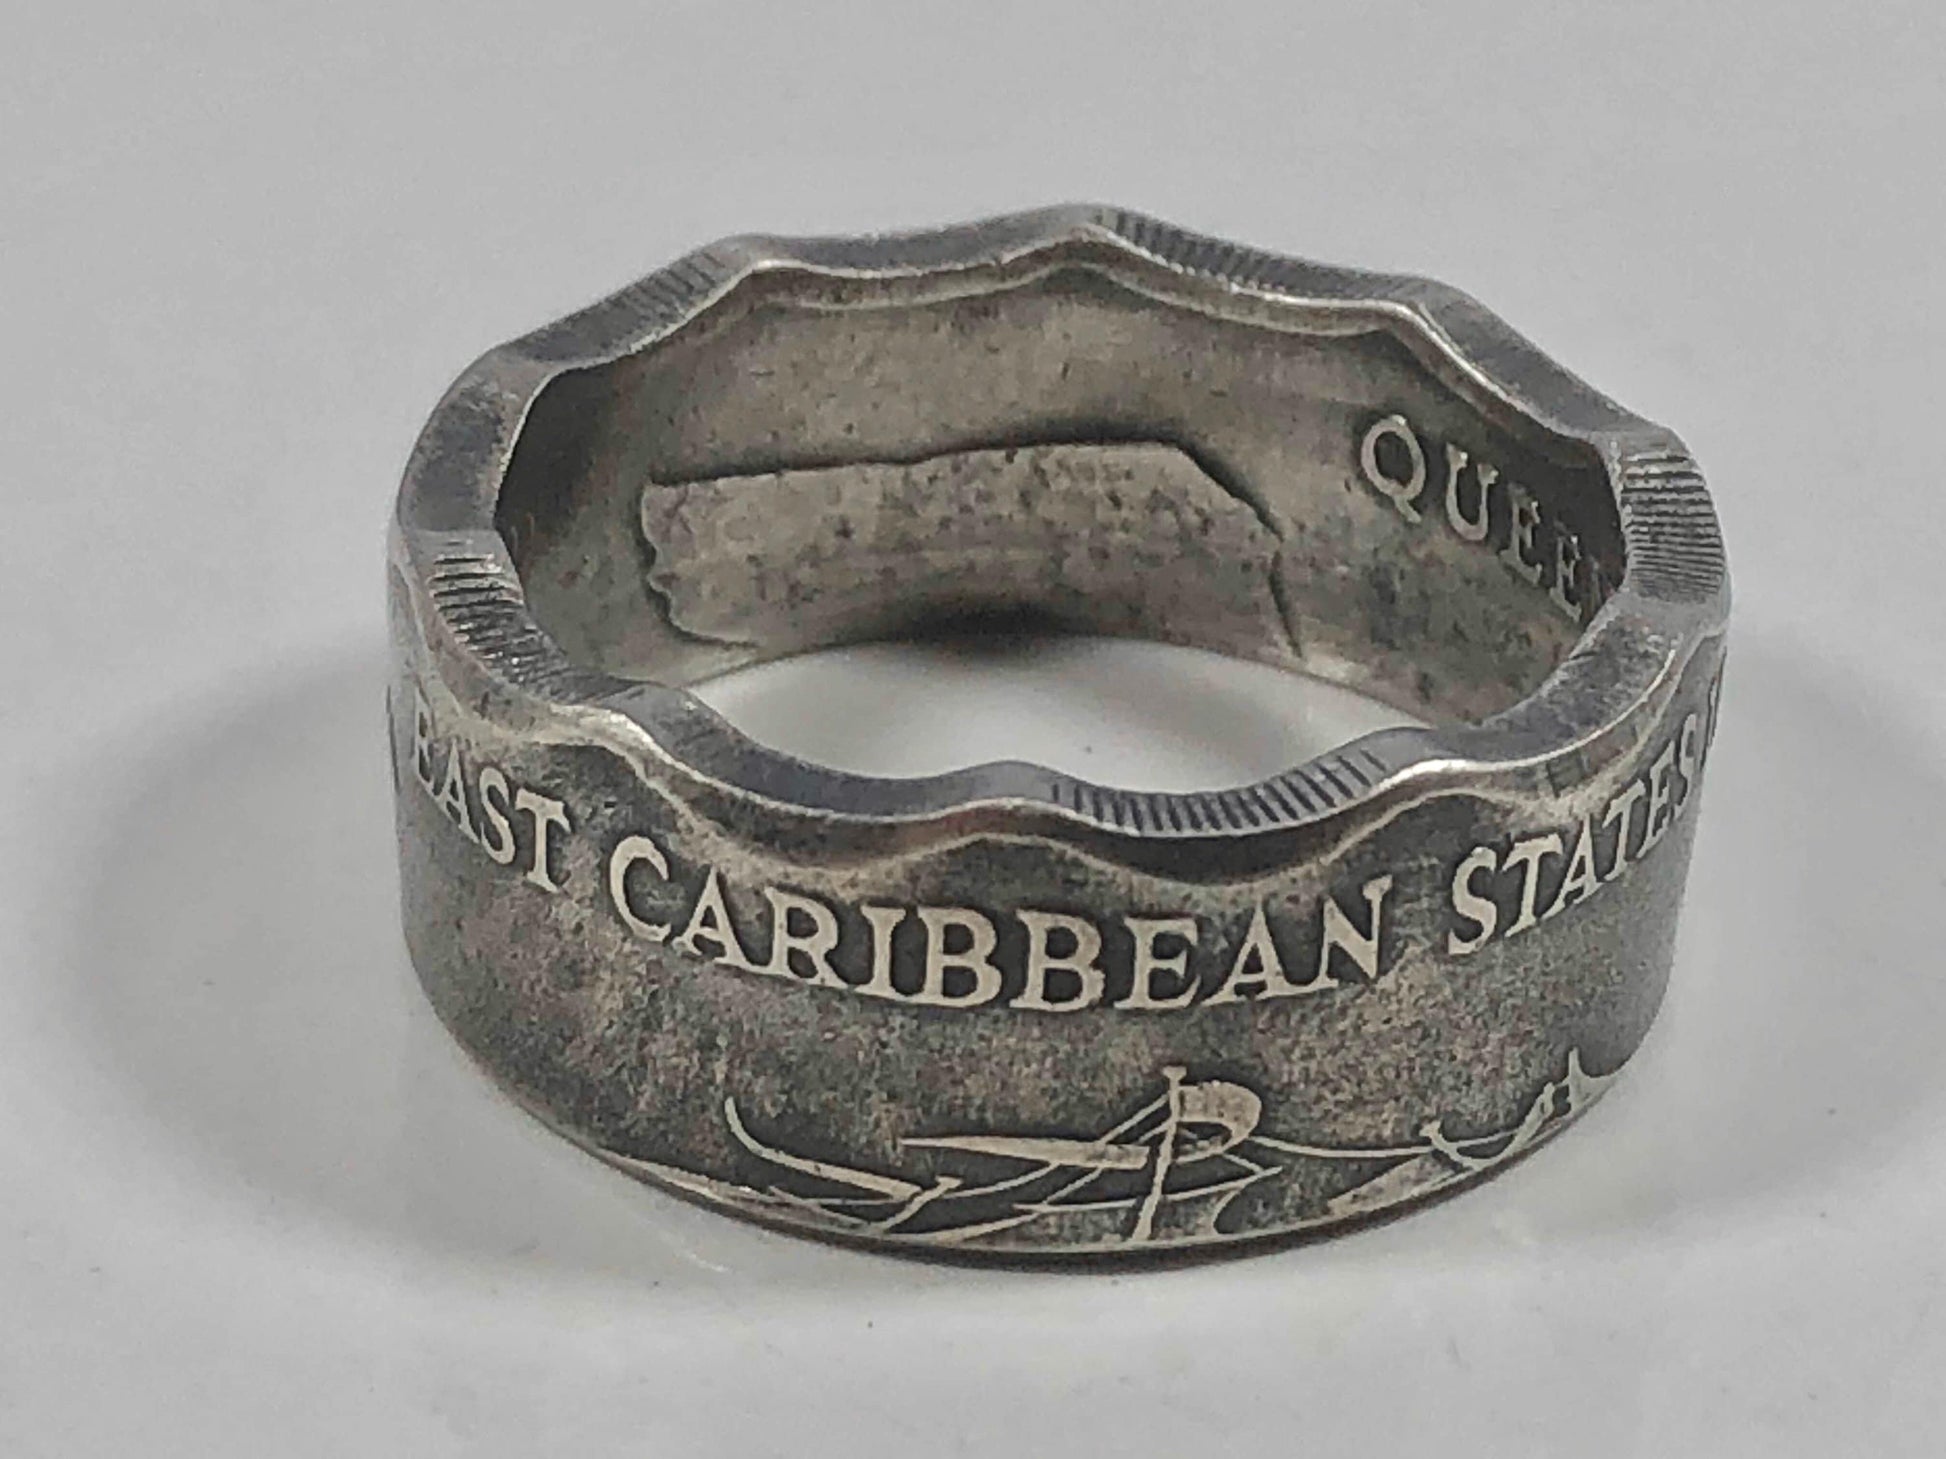 Eastern Caribbean Ring One Dollar Coin Ring Handmade Personal Jewelry Ring Gift For Friend Coin Ring Gift For Him Her World Coin Collector